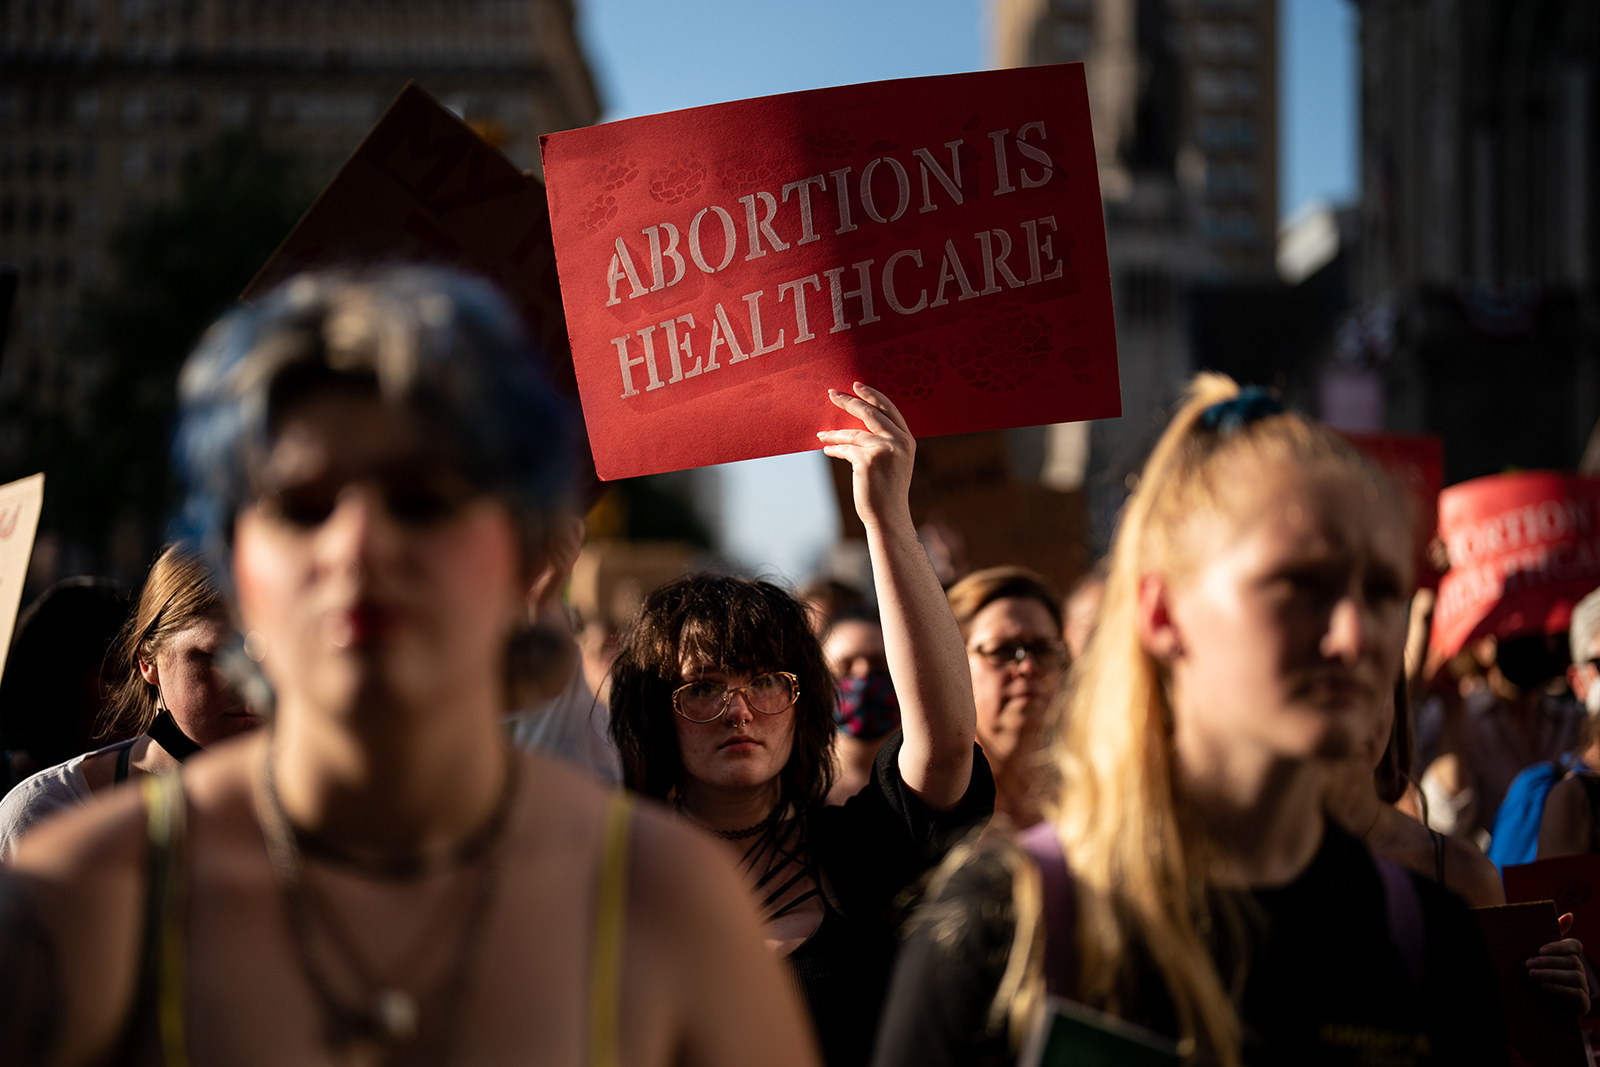 Person in a crowd of protesters holds up sign &quot;Abortion is healthcare&quot;